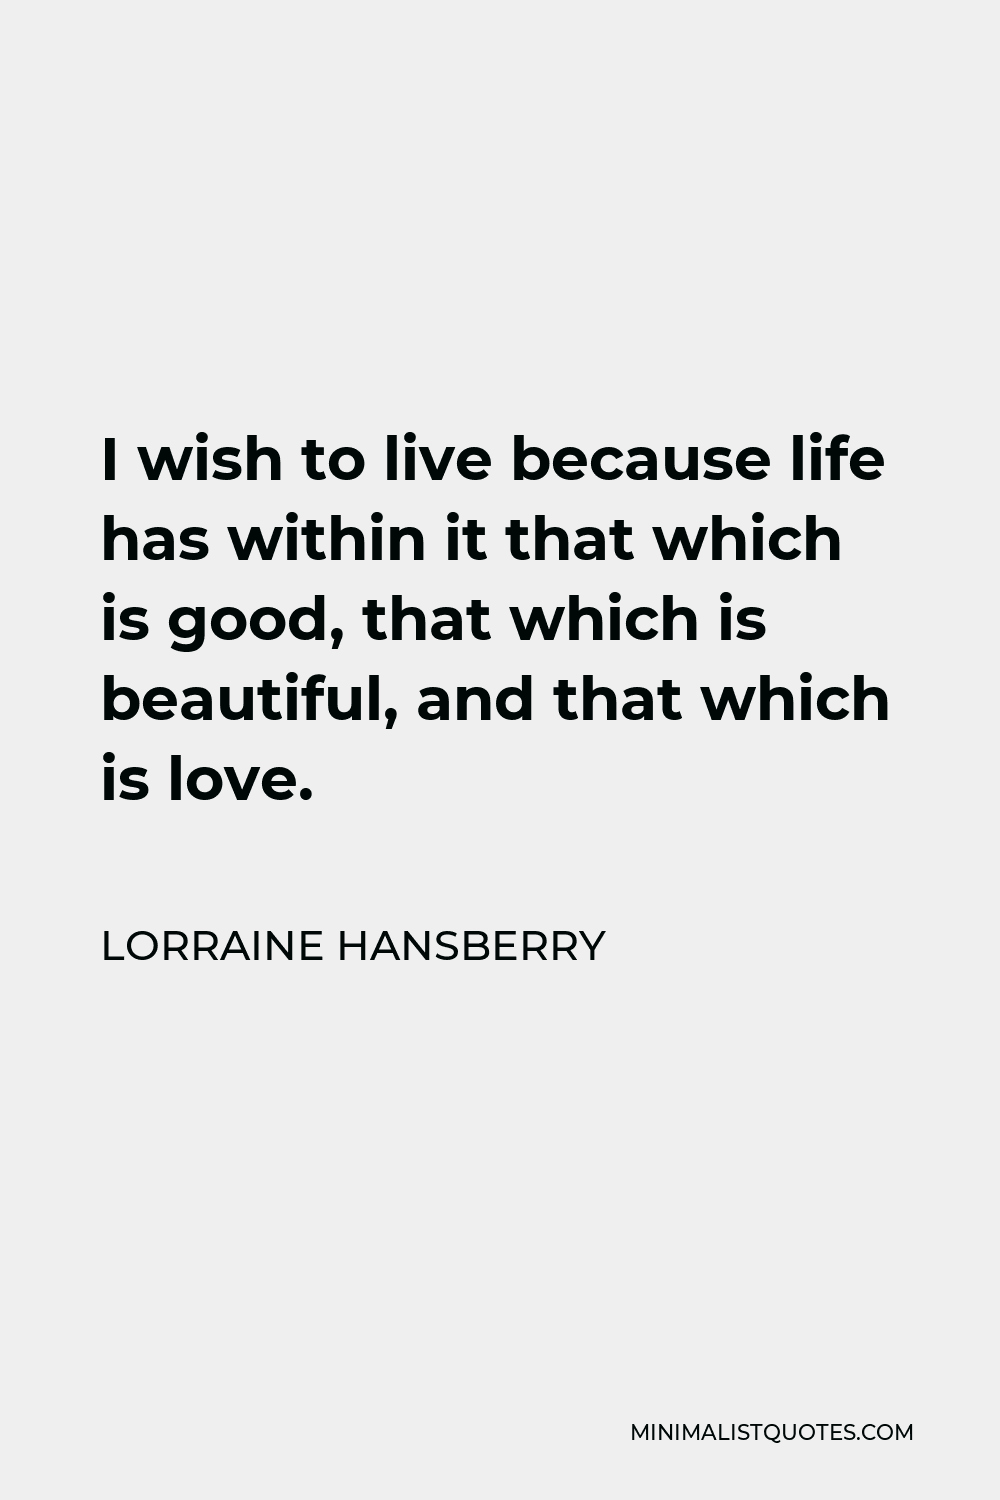 Lorraine Hansberry Quote - I wish to live because life has within it that which is good, that which is beautiful, and that which is love.